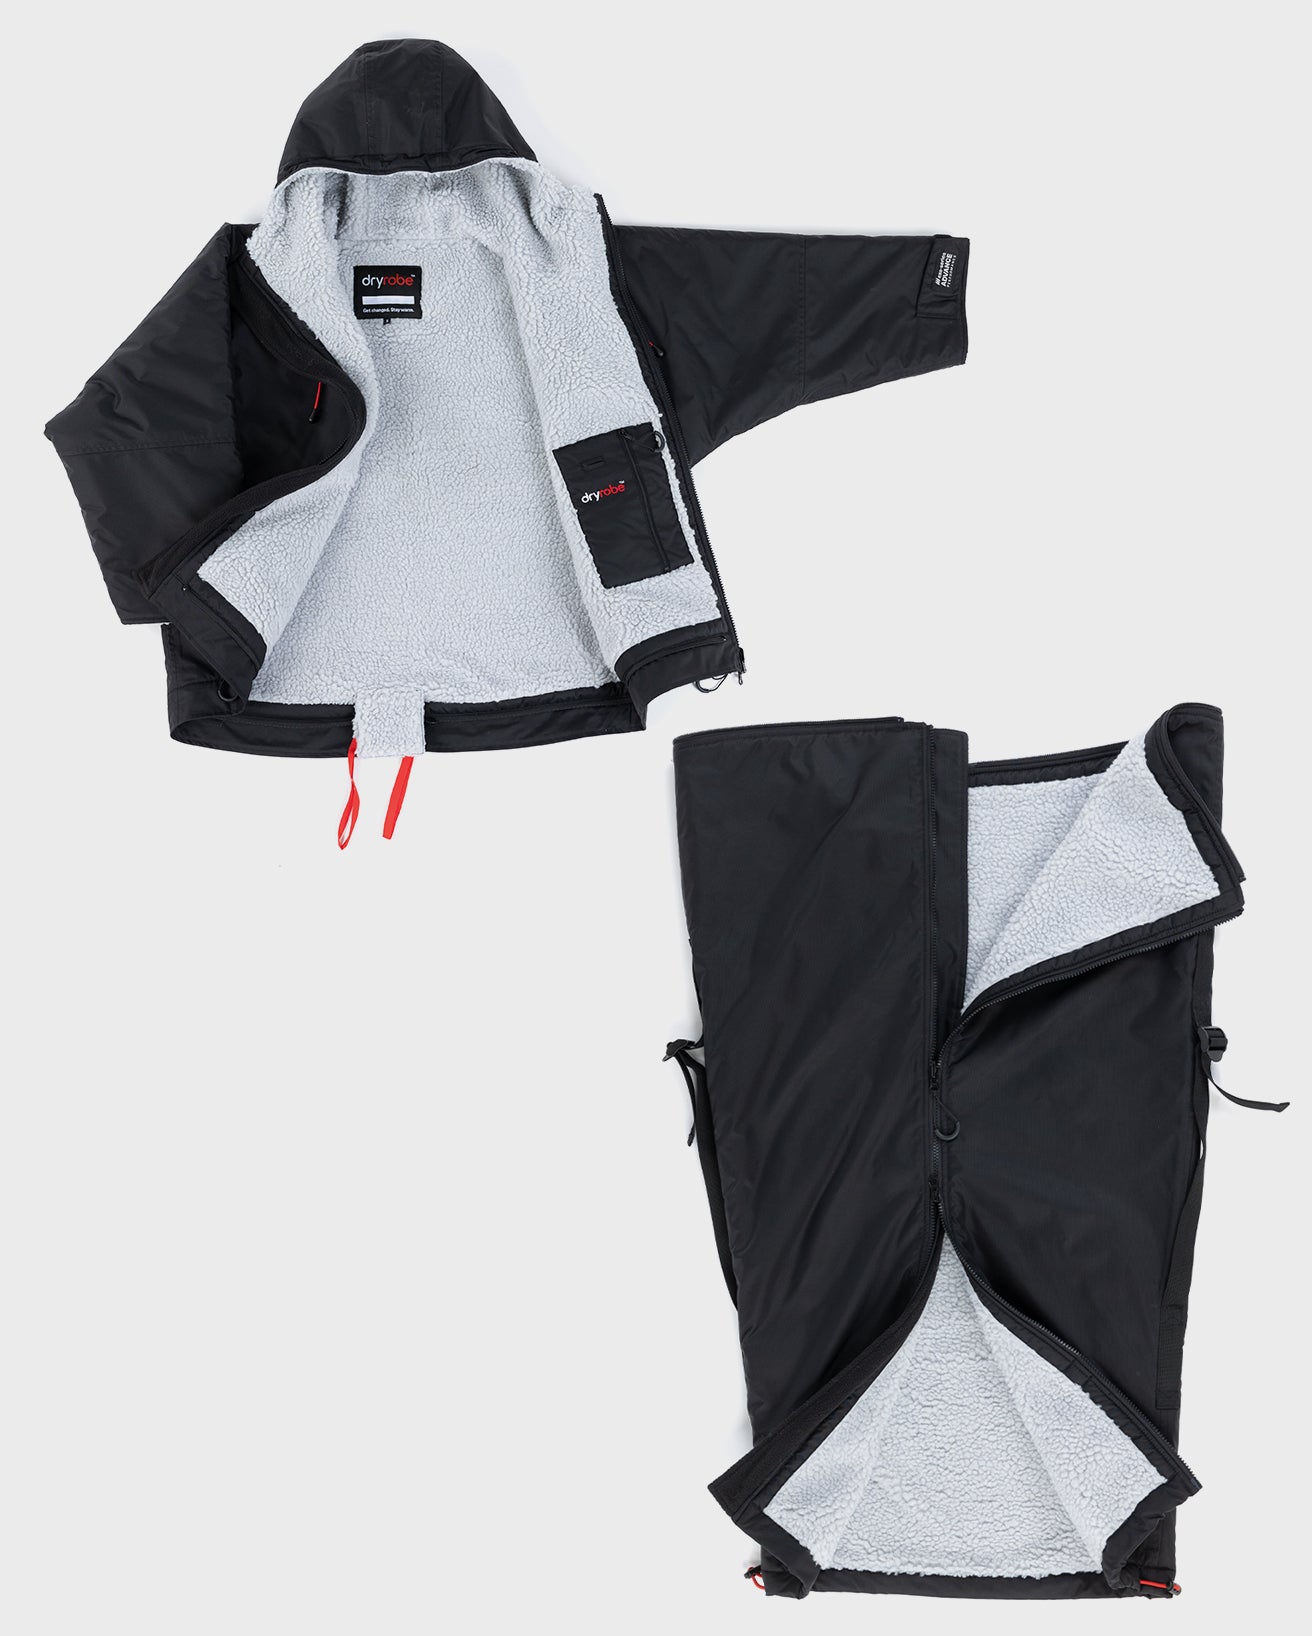 dryrobe® Adapt jacket and lower removable part of garment